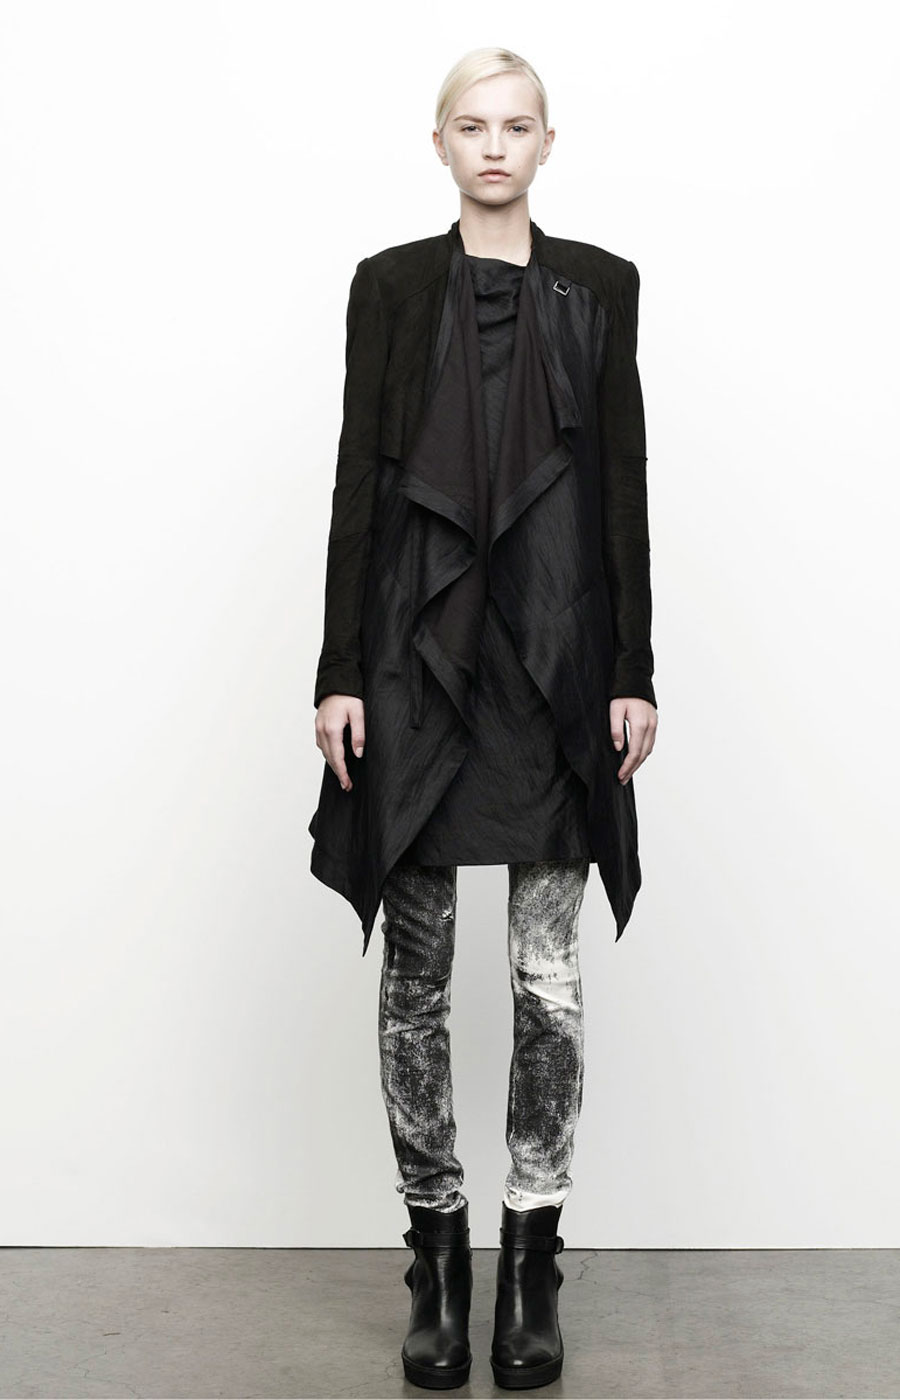 Pre-Fall 2012/2013 by Helmut Lang (5)